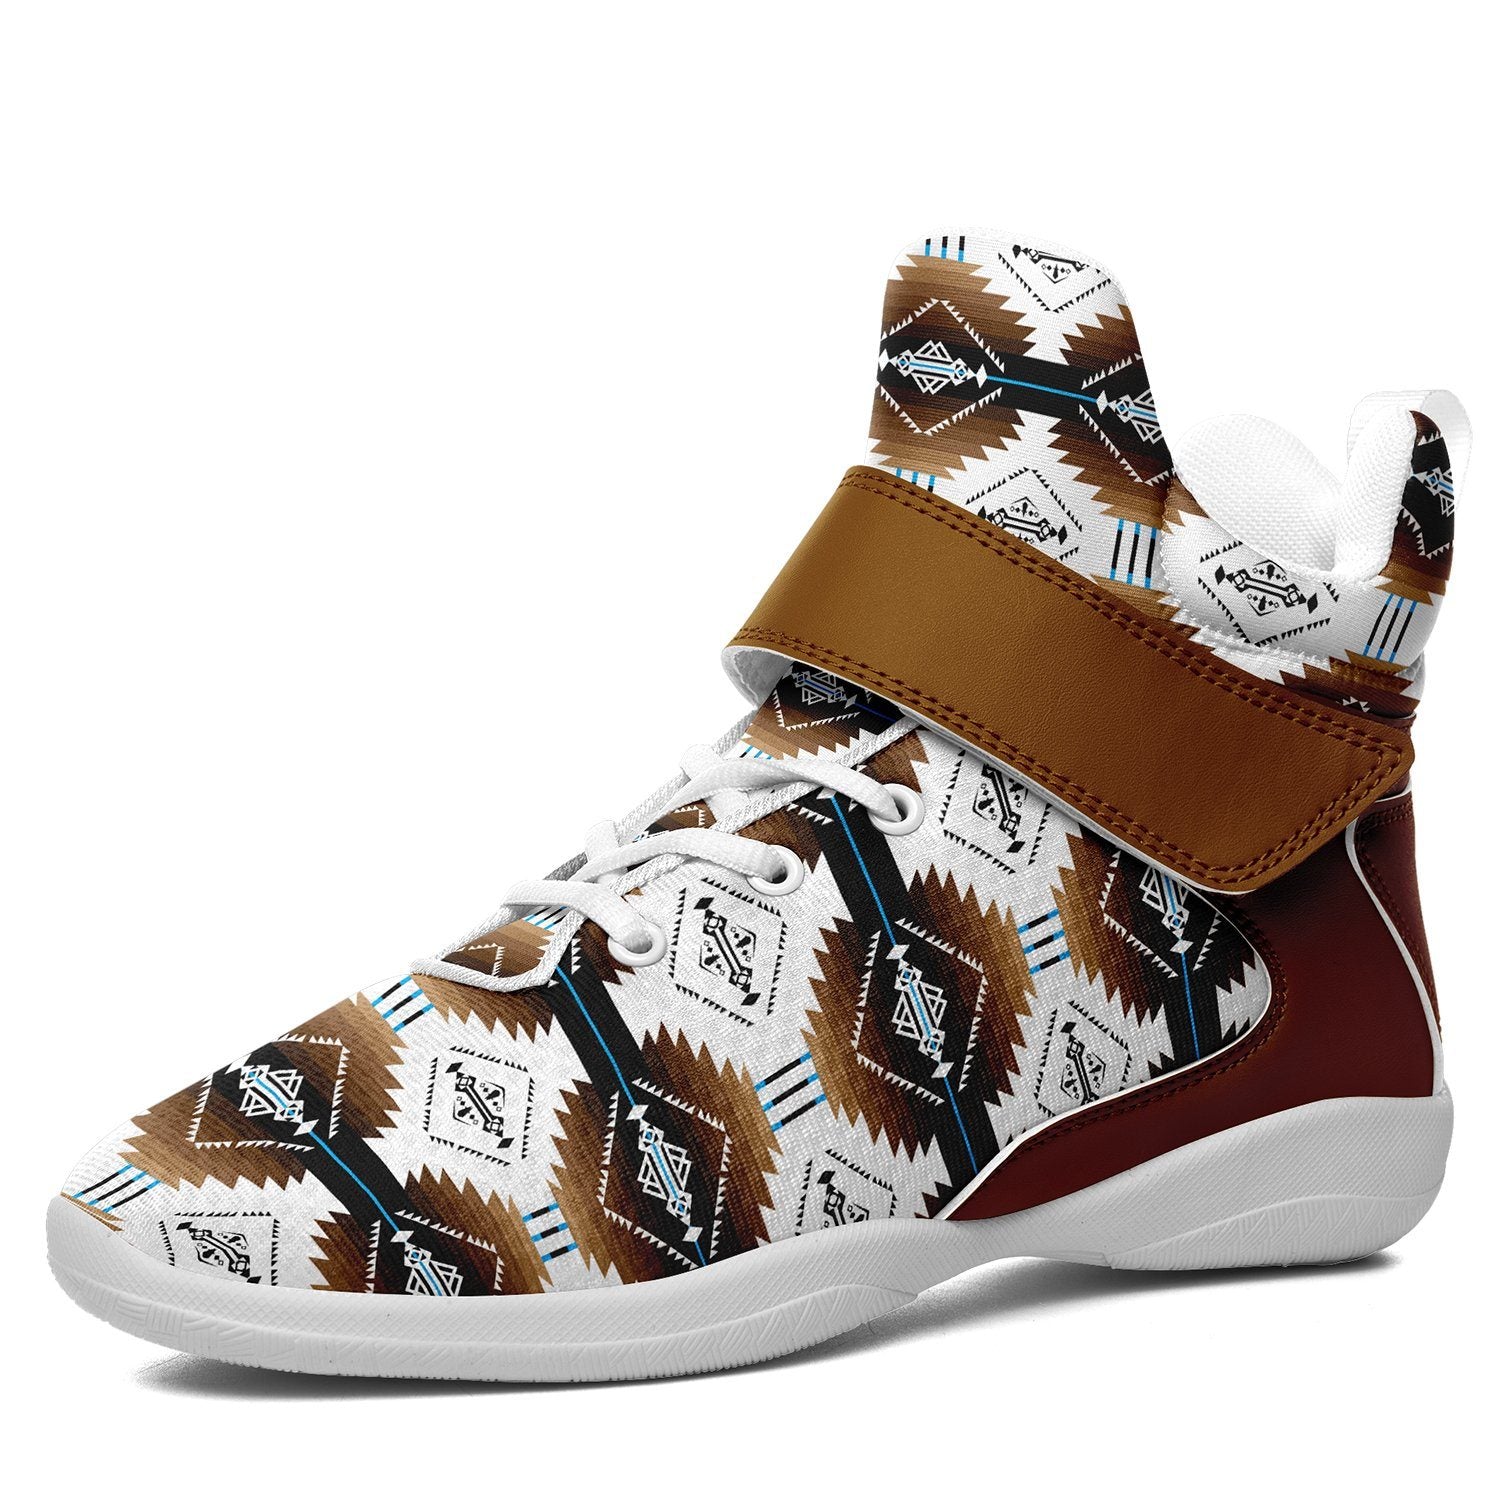 Cofitichequi White Ipottaa Basketball / Sport High Top Shoes 49 Dzine US Women 4.5 / US Youth 3.5 / EUR 35 White Sole with Brown Strap 